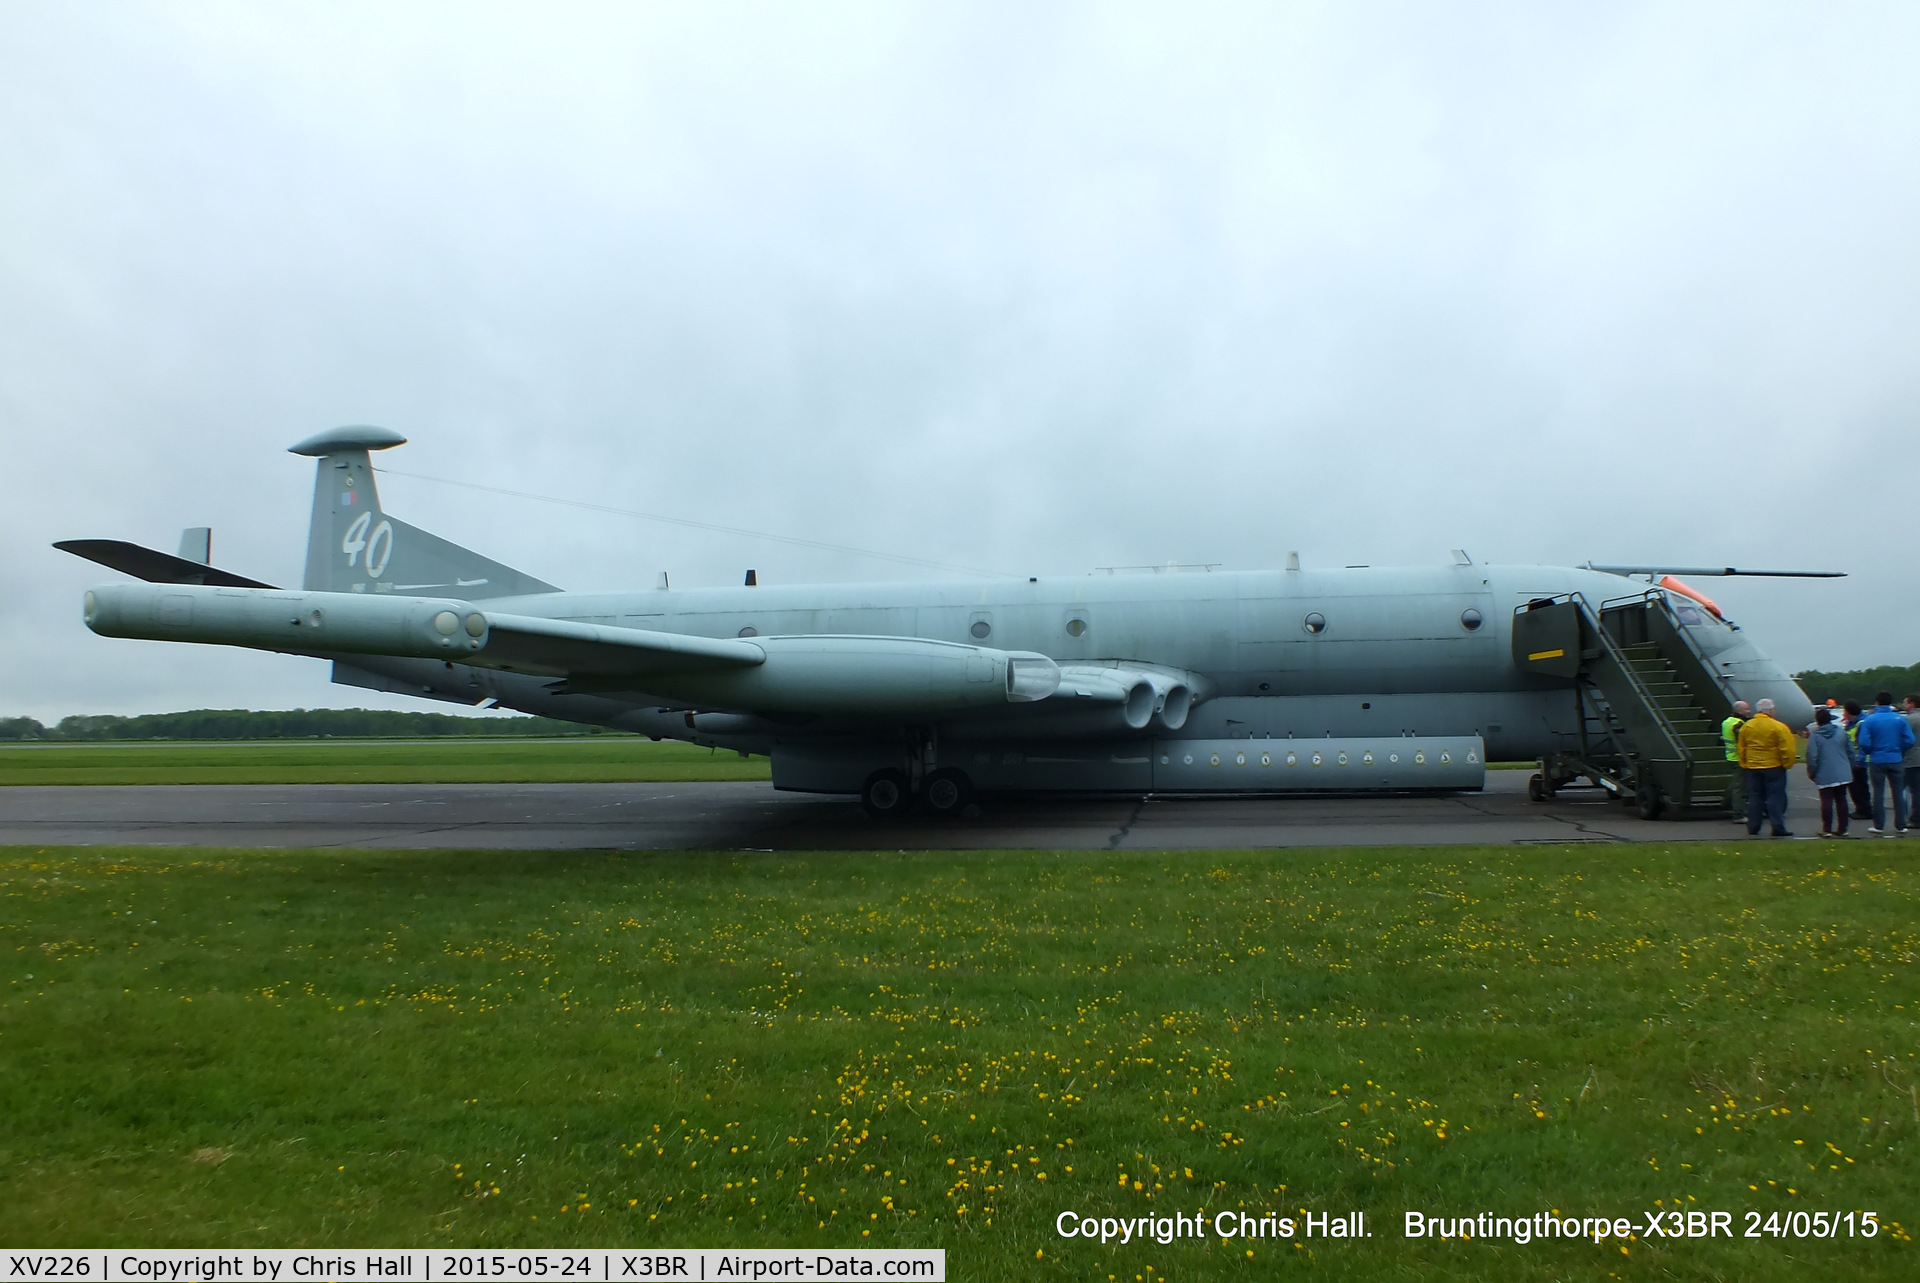 XV226, 1968 Hawker Siddeley Nimrod MR.2 C/N 8001, at the Cold War Jets Open Day 2015